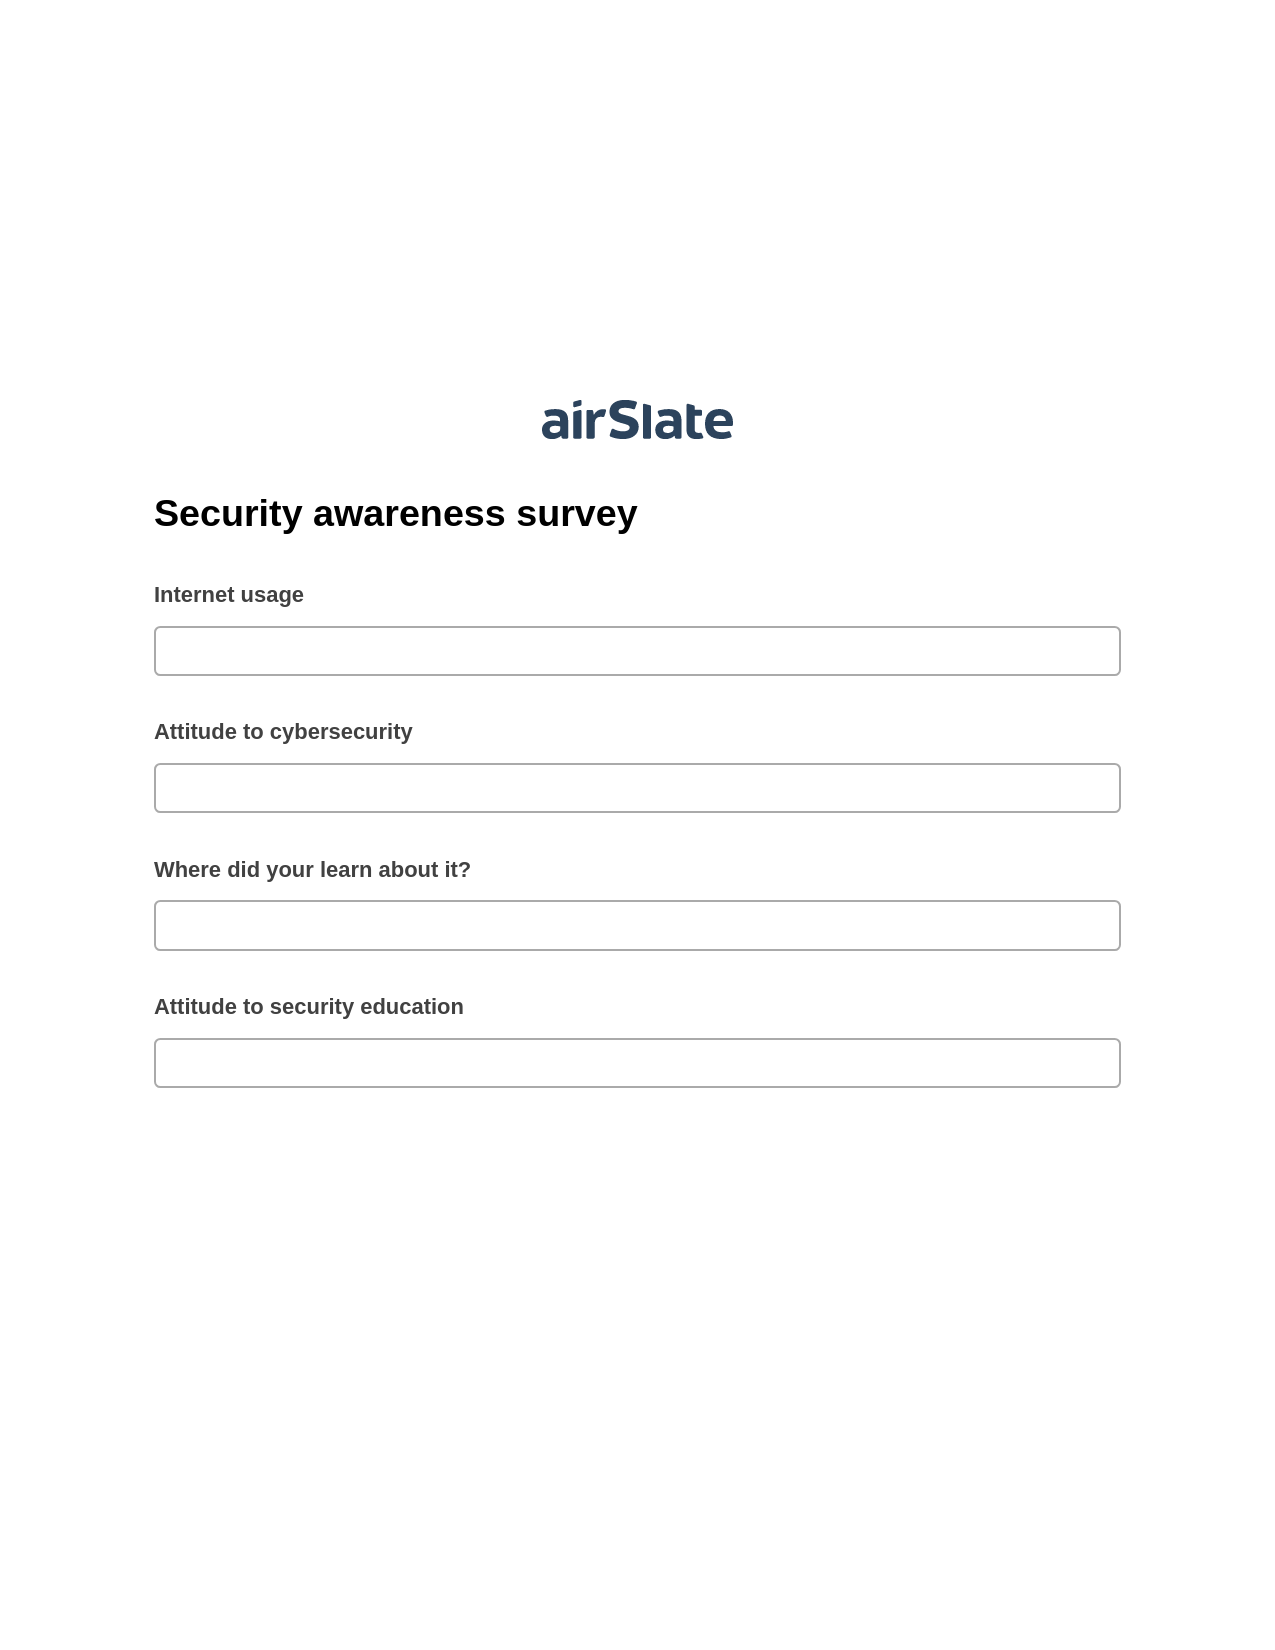 Security awareness survey Pre-fill from MS Dynamics 365 Records DEPRECATED, Mailchimp add recipient to audience Bot, Archive to SharePoint Folder Bot